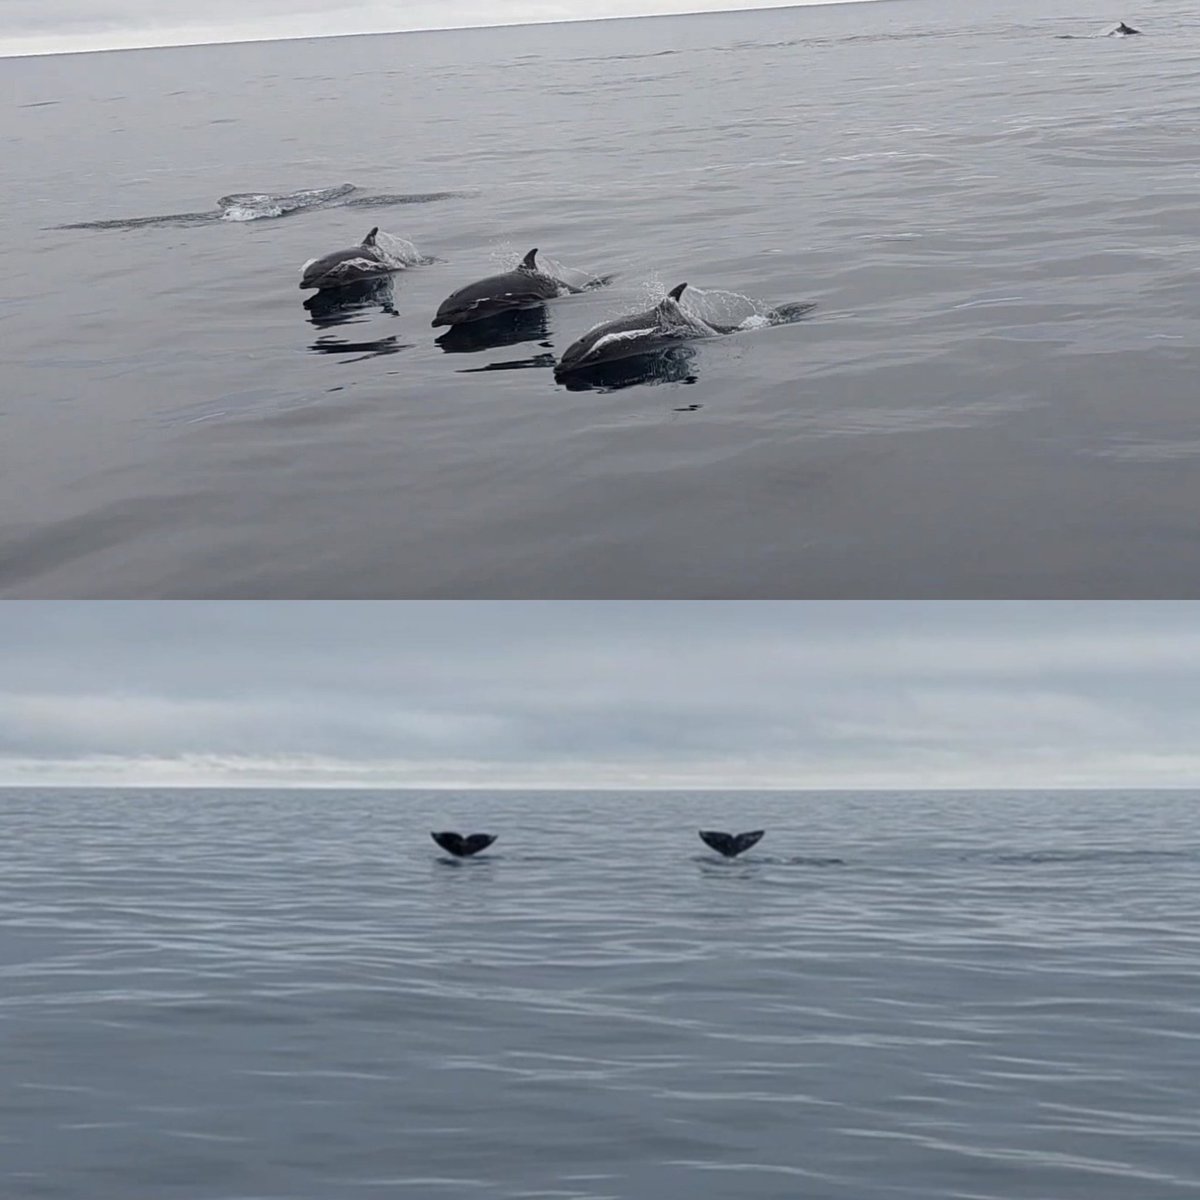 Had an amazing week of science at the Gordon Research Conference Robotics 2024 in Ventura, California! @GordonConf Inspiring talks and plenty of time for discussions. Of course also making new friends and watching some whales and dolphins!